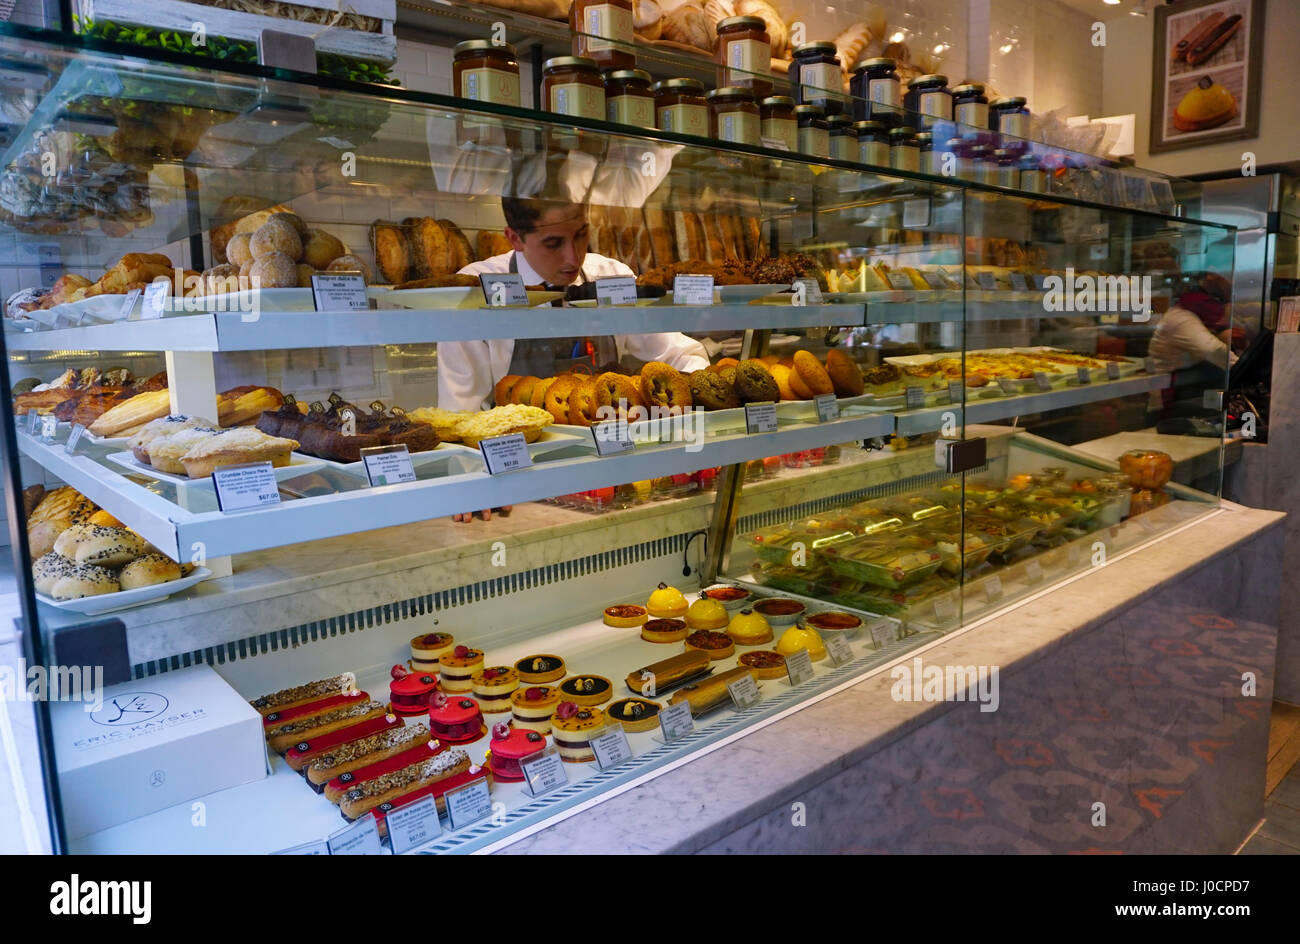 Maison Kayser Paris, a French pastry shop in the Central historic district  of Mexico City, Mexico Stock Photo - Alamy